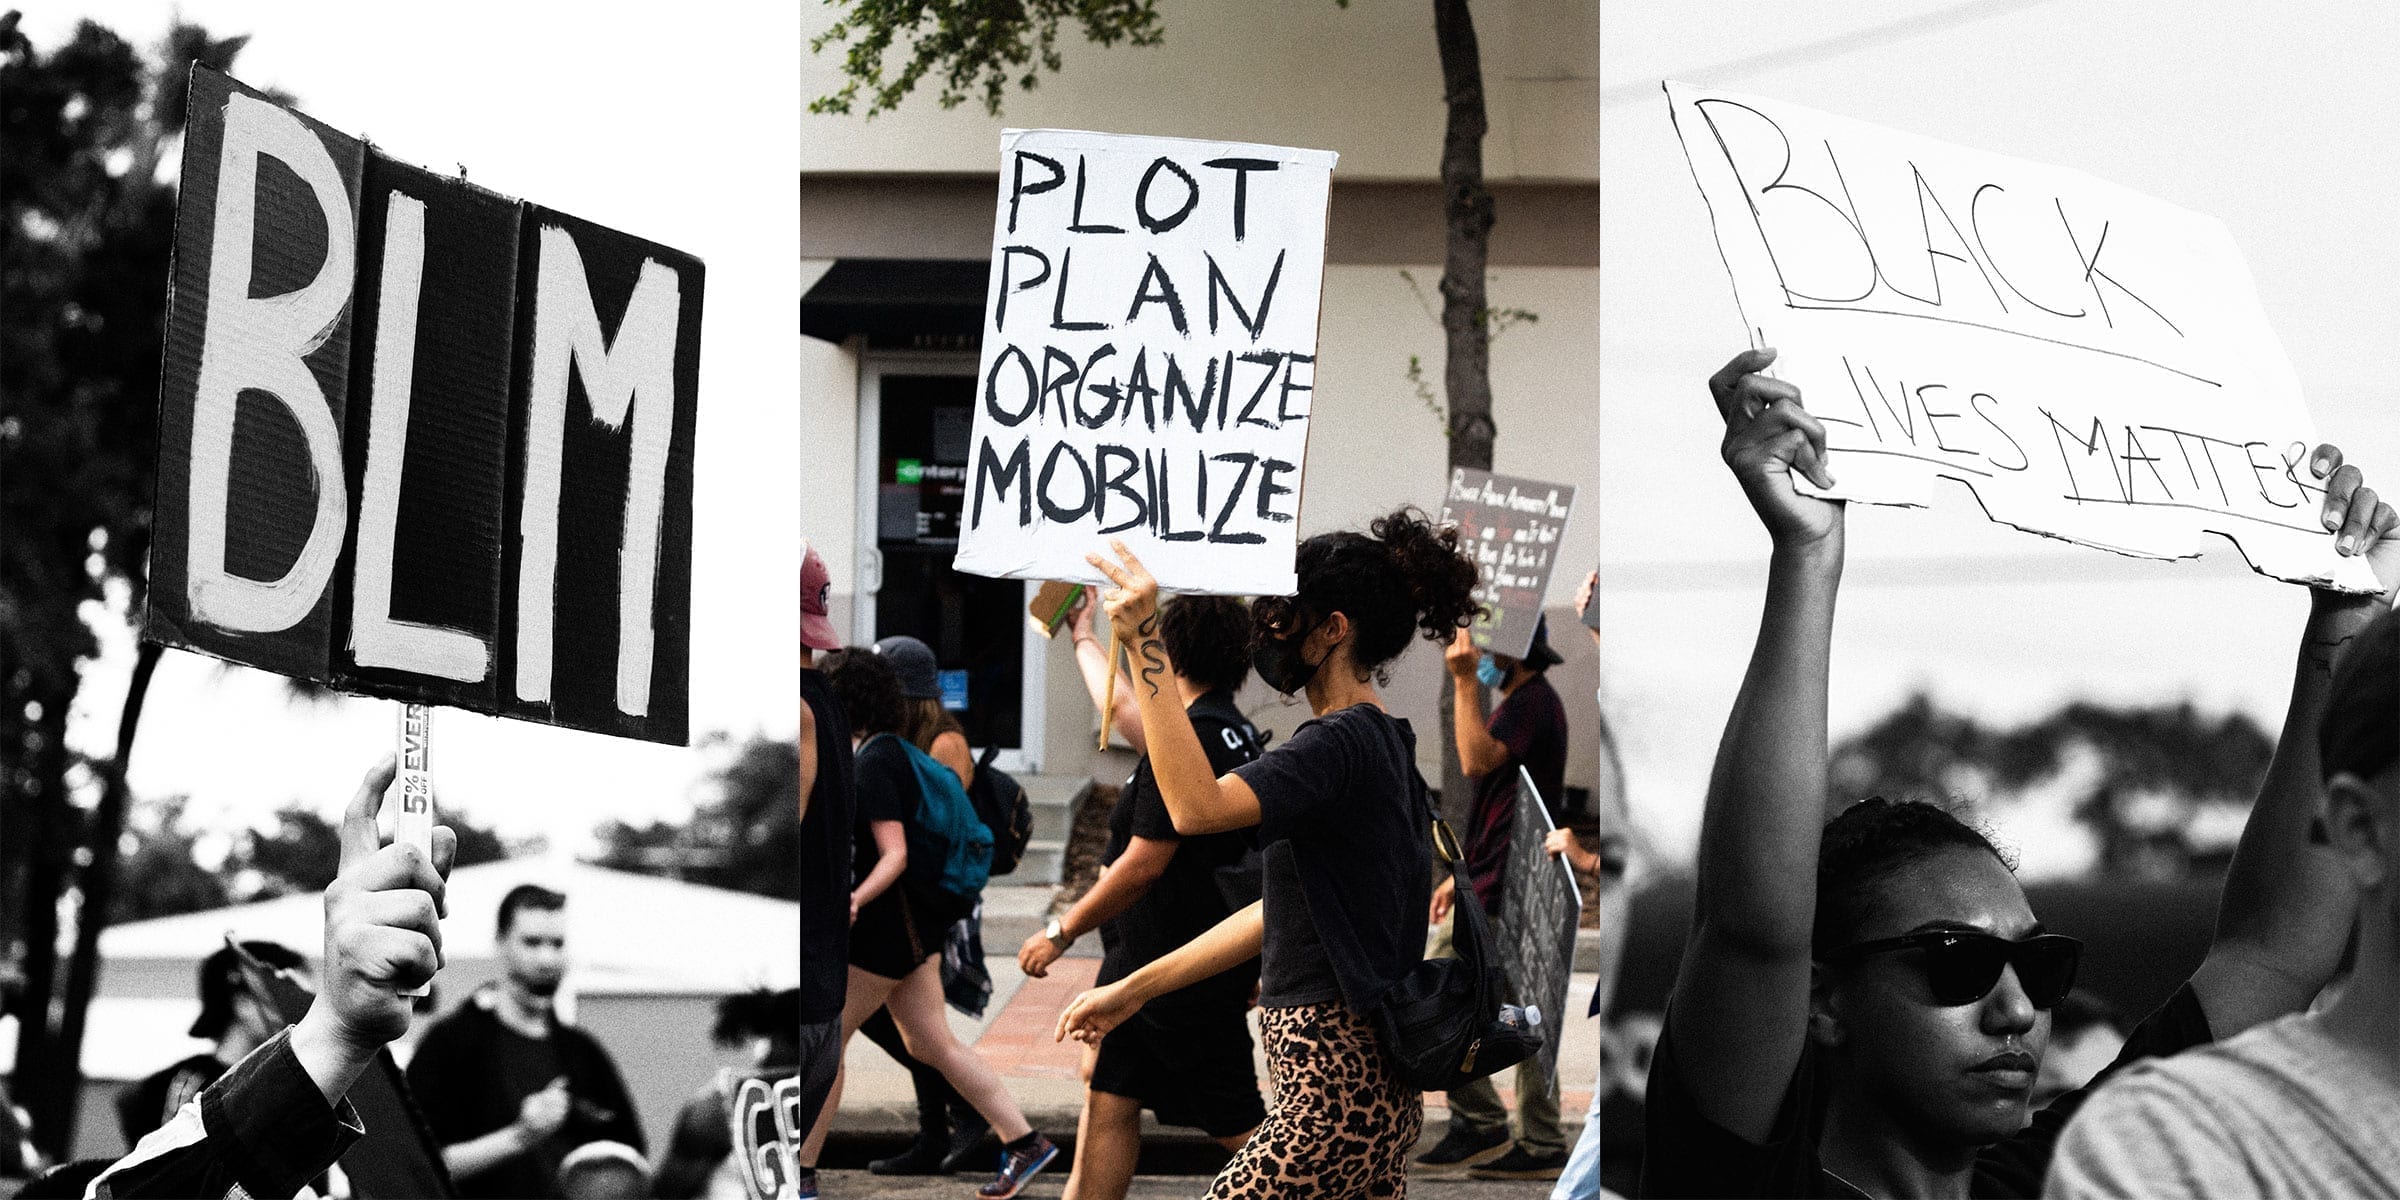 Three photos of people at protests are displayed side by side. The first shows a sign reading "BLM"; the second shows a woman whose sign reads "Plot Plan Mobilize Organize"; the third shows a woman whose sign reads "Black Lives Matter".